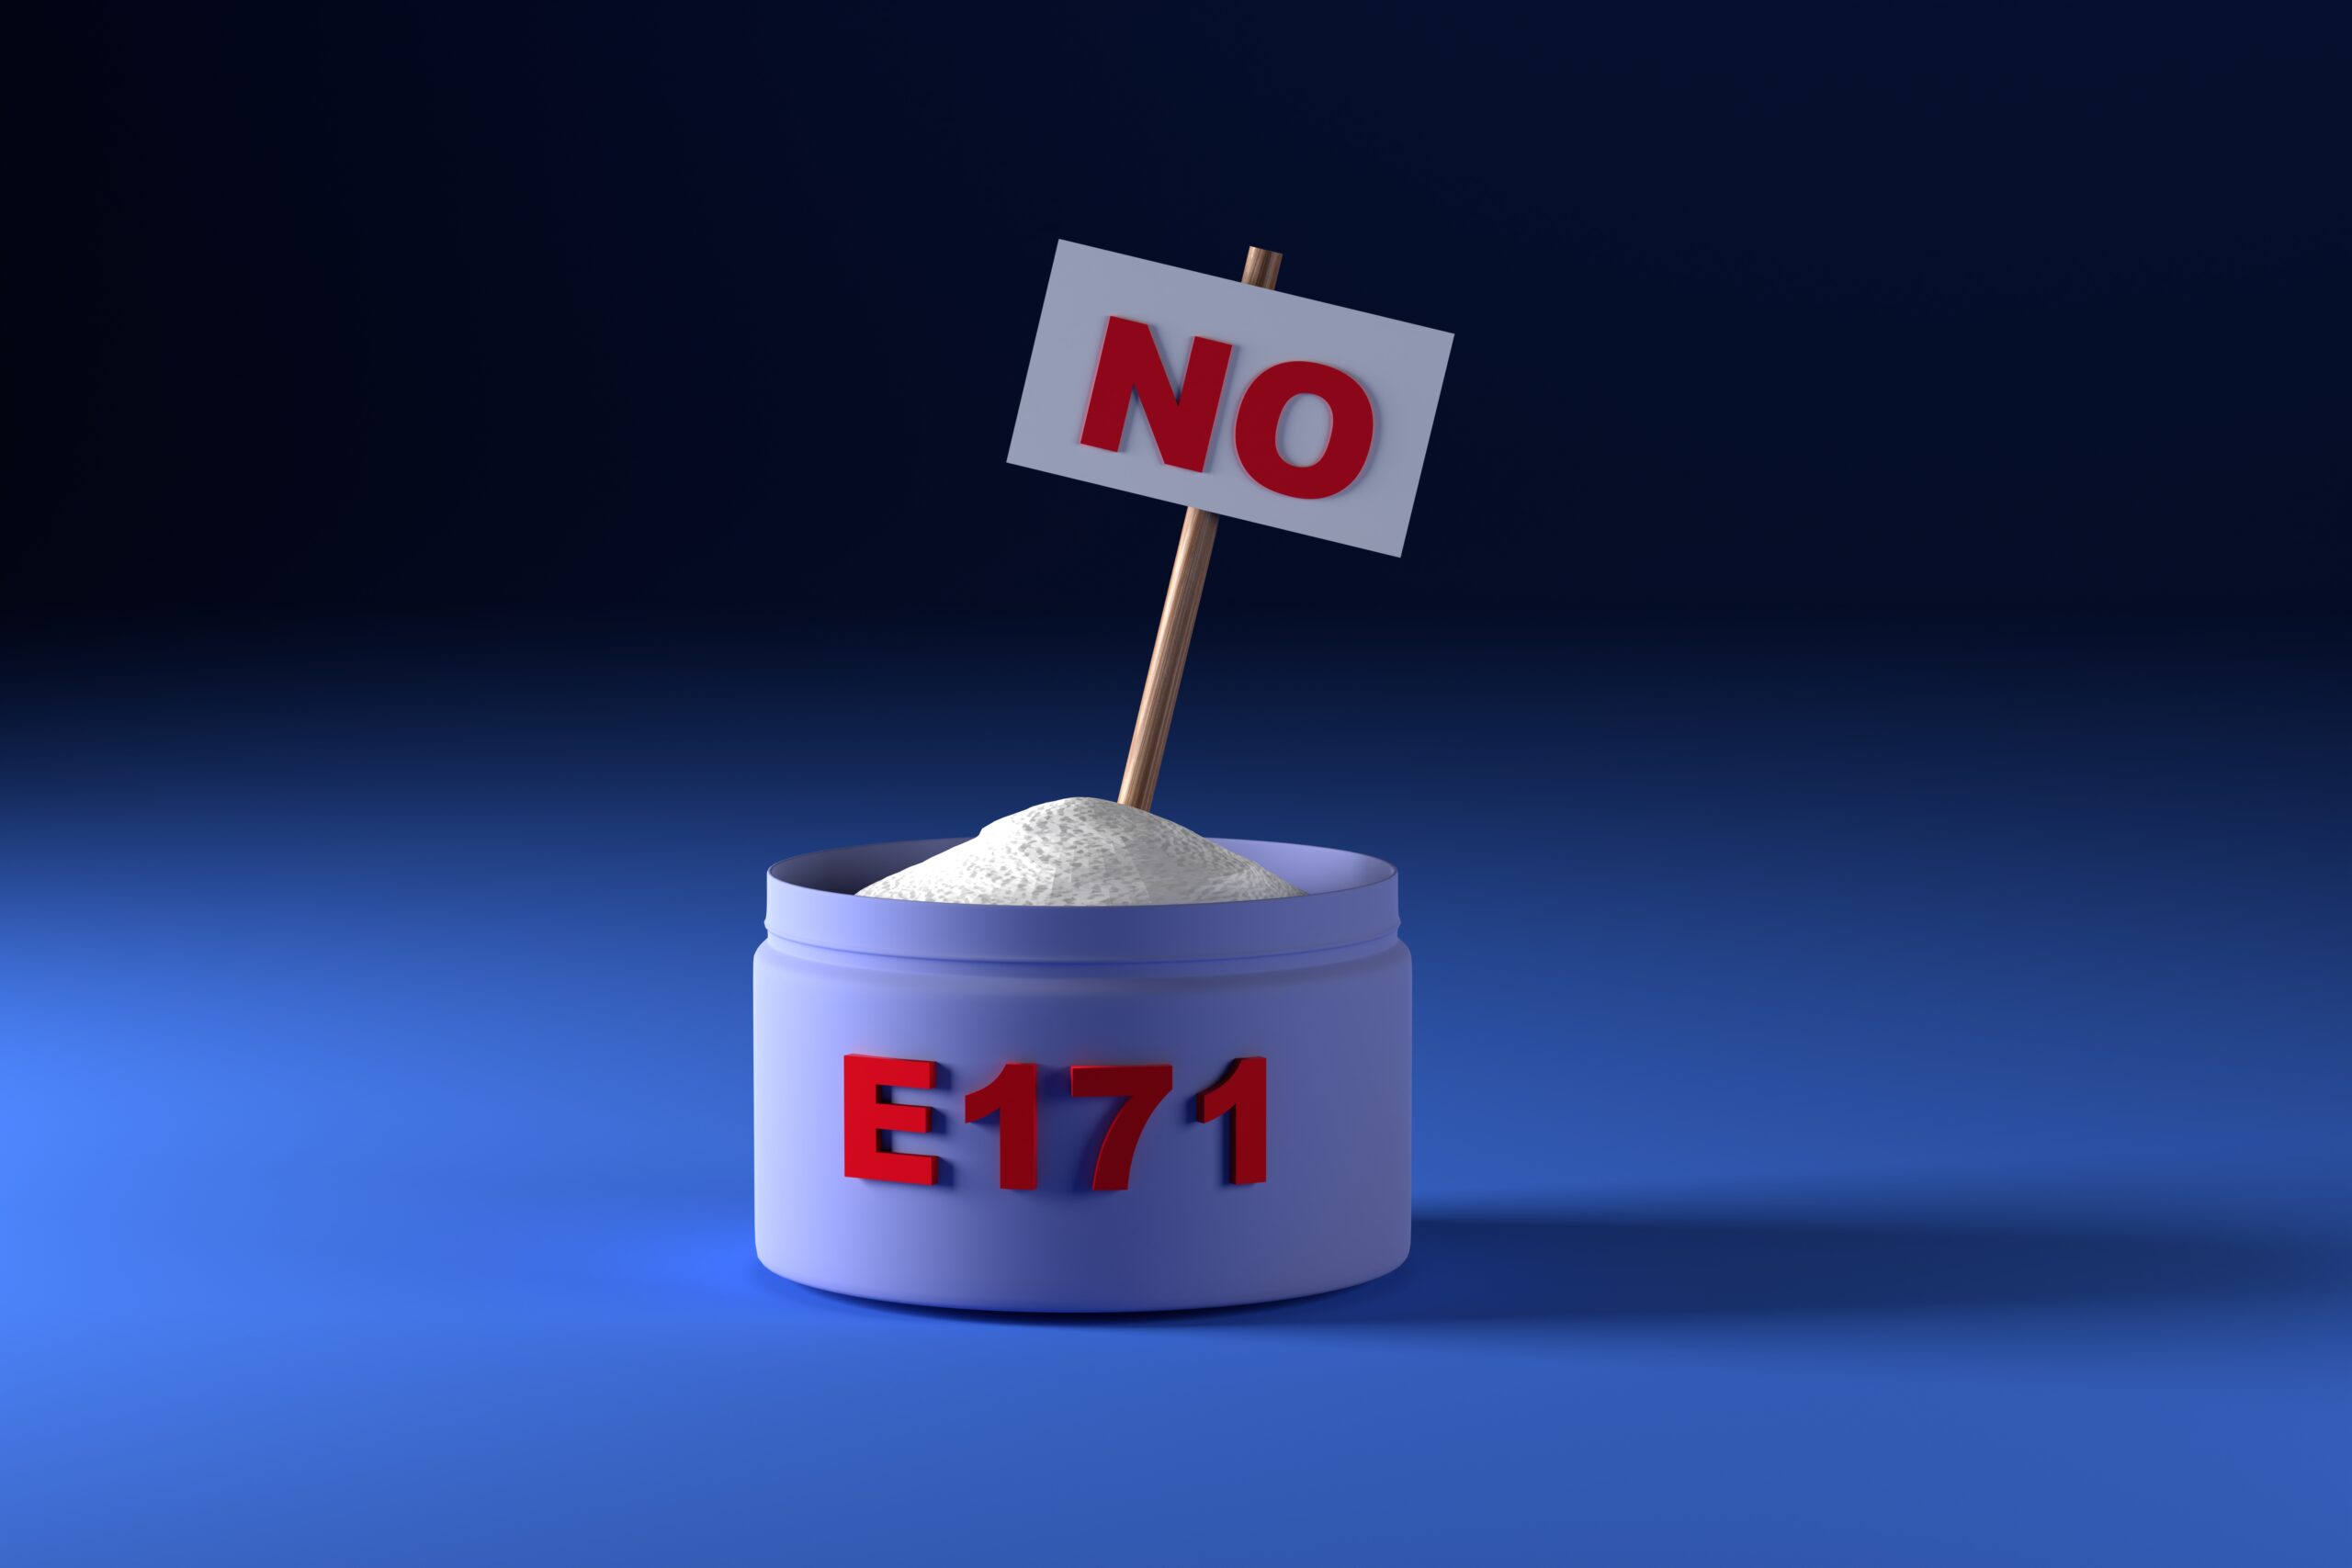 Prohibition of Titanium dioxide in the European Union. Food supplement E171 and the inscription no on a blue background. 3D render.